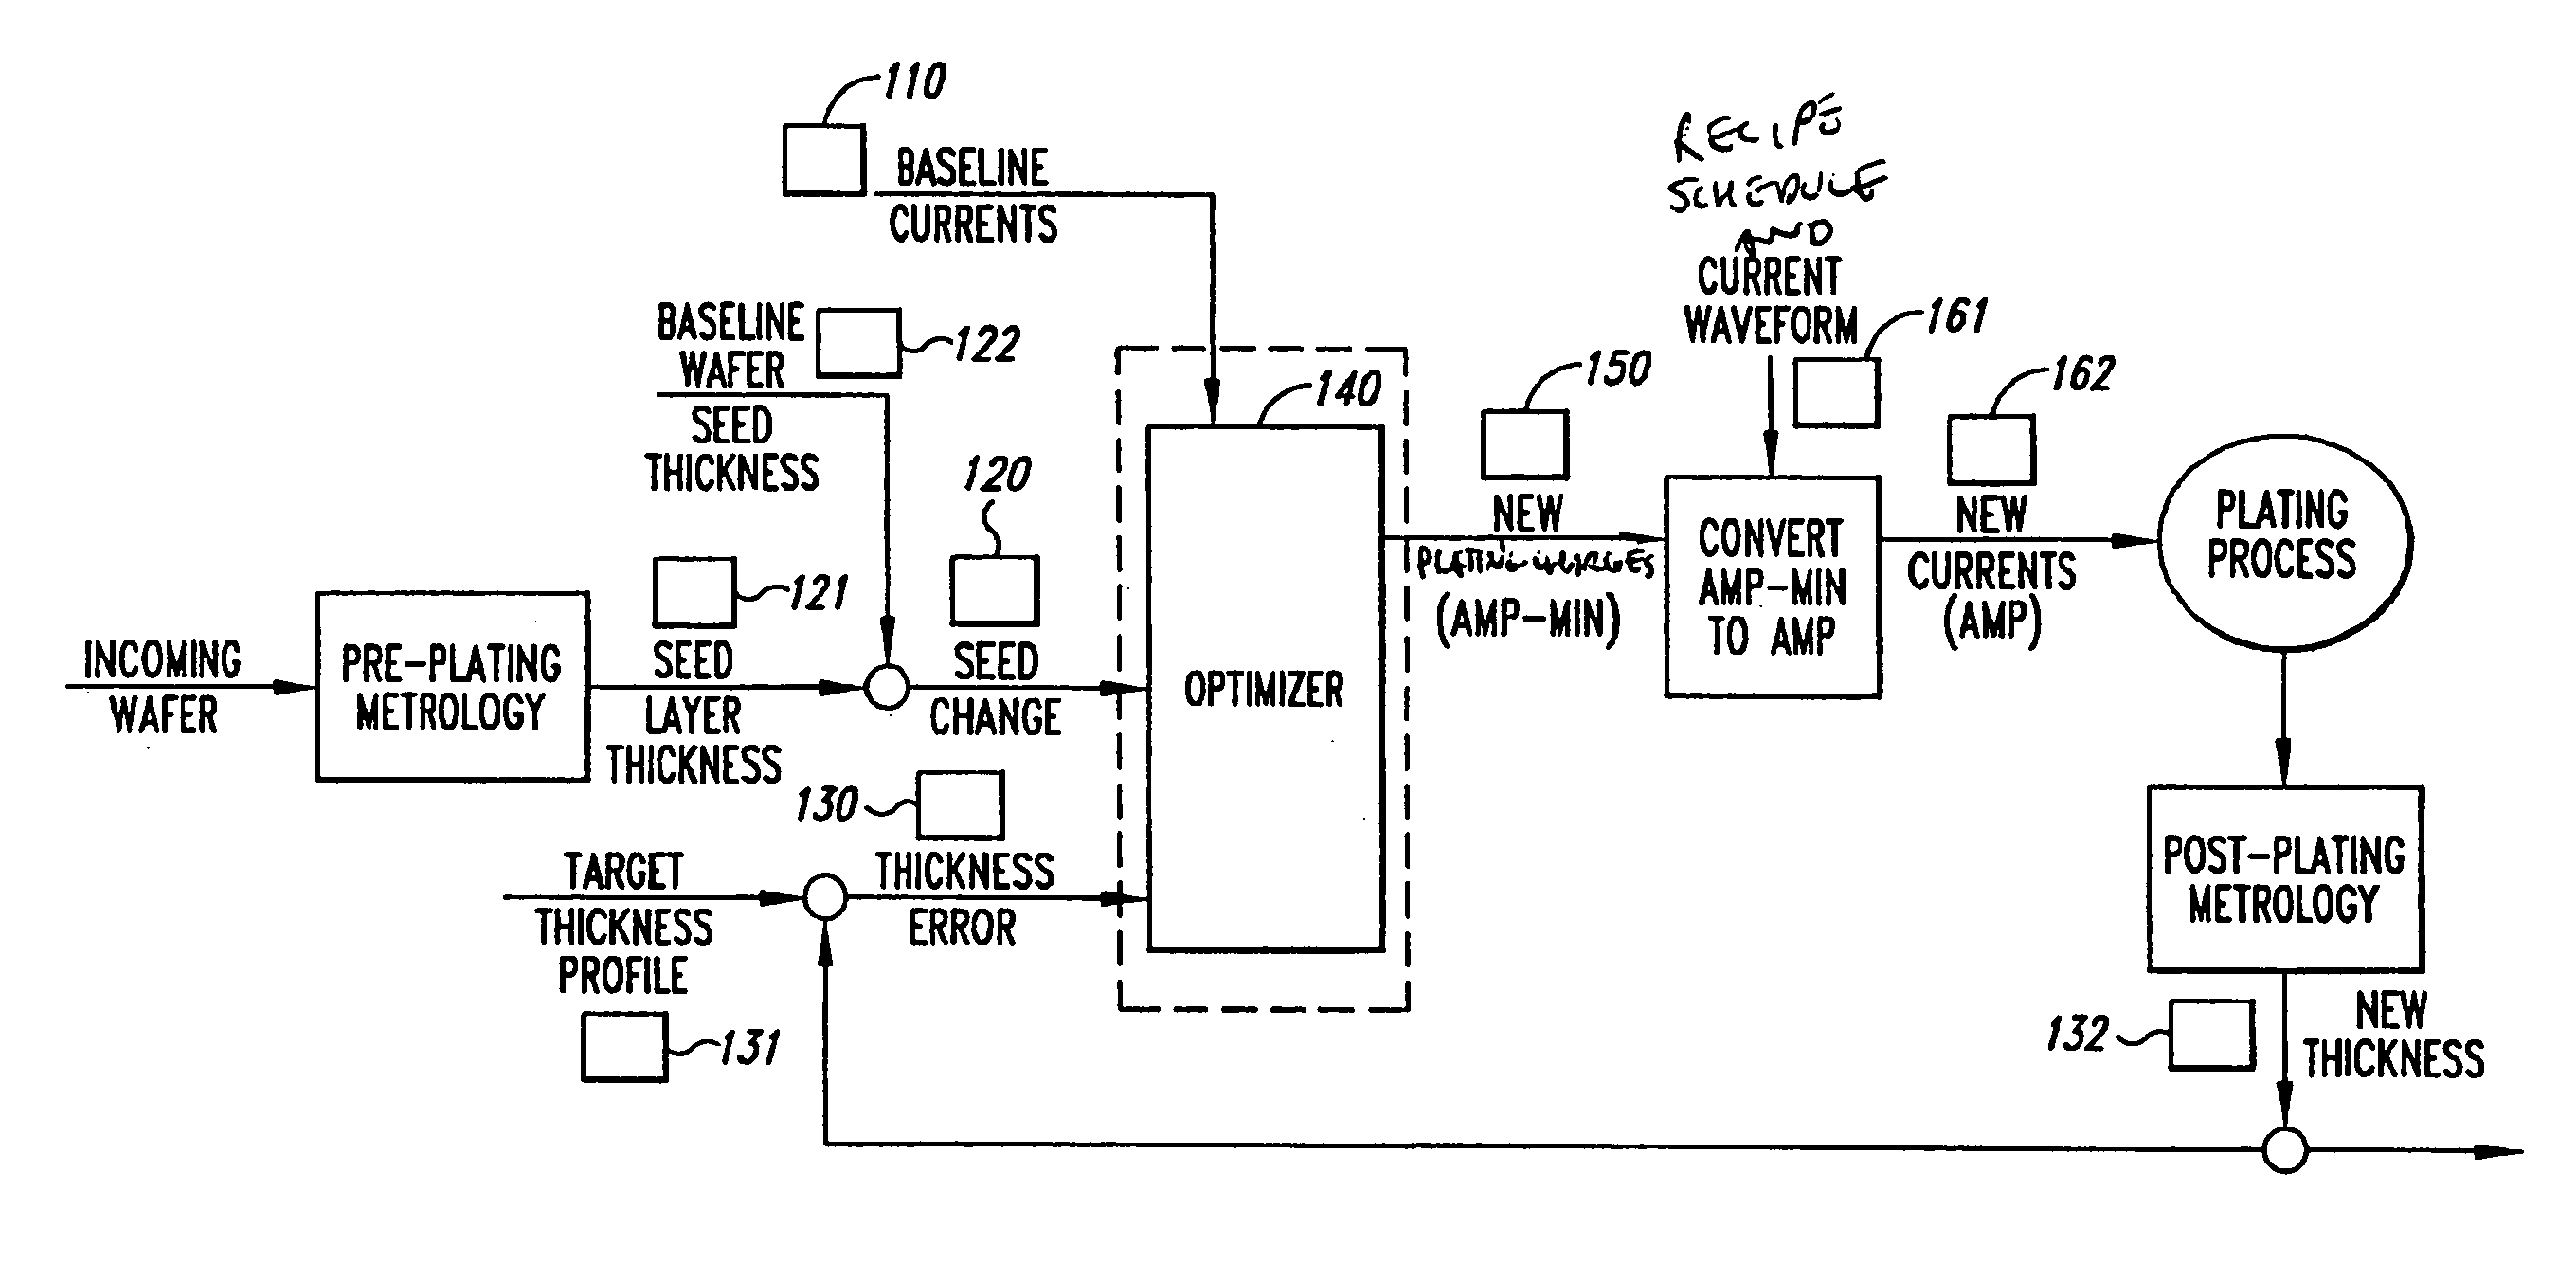 Tuning electrodes used in a reactor for electrochemically processing a microelectric workpiece